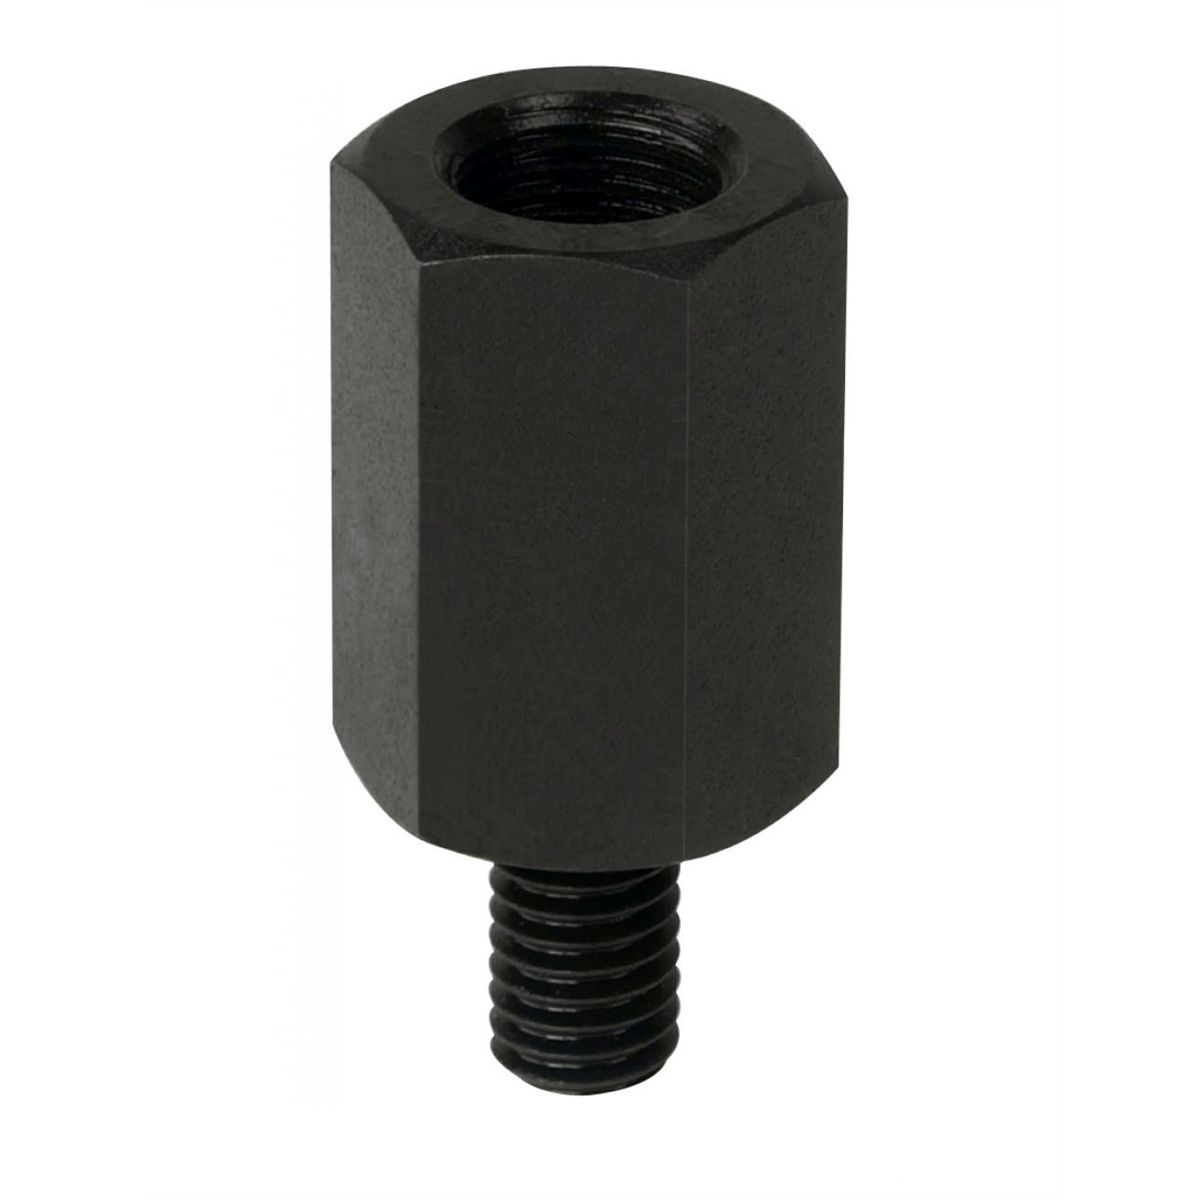 Puller Adapter 5/8-18 Female To 1/2-13 Male